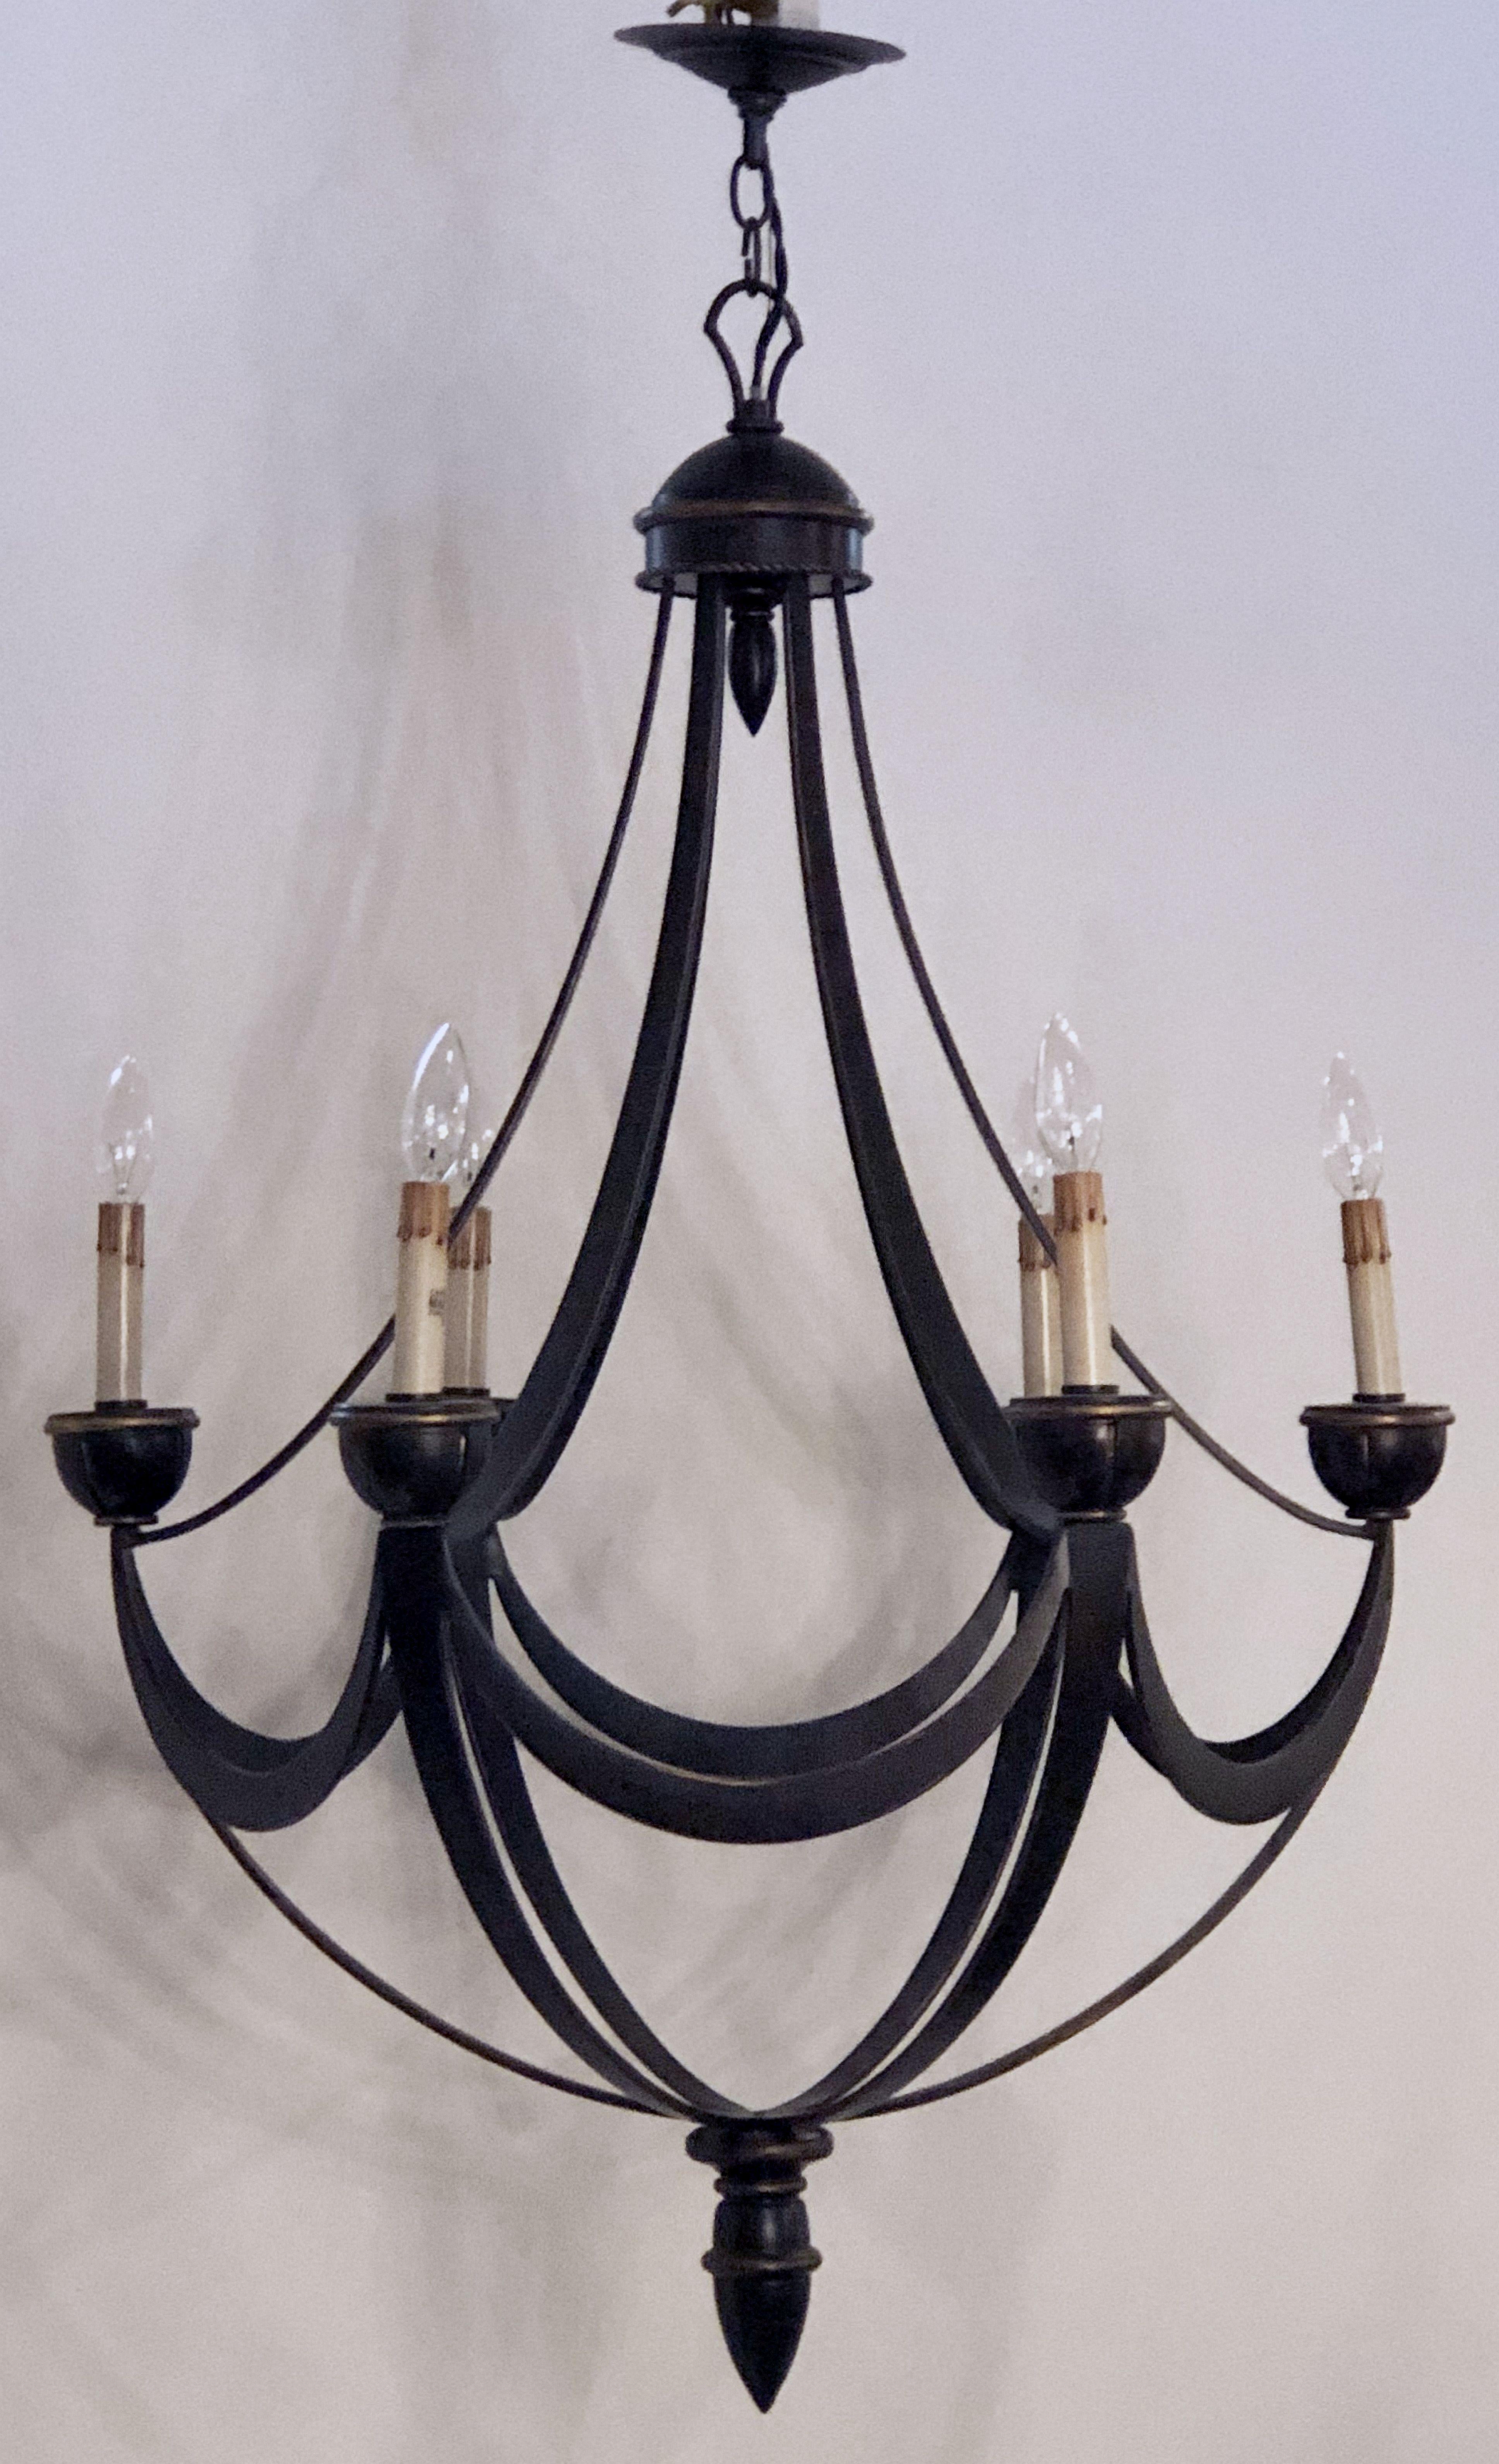 20th Century American Six-Light Chandelier or Hanging Fixture, Modern Empire Style (Dia 29